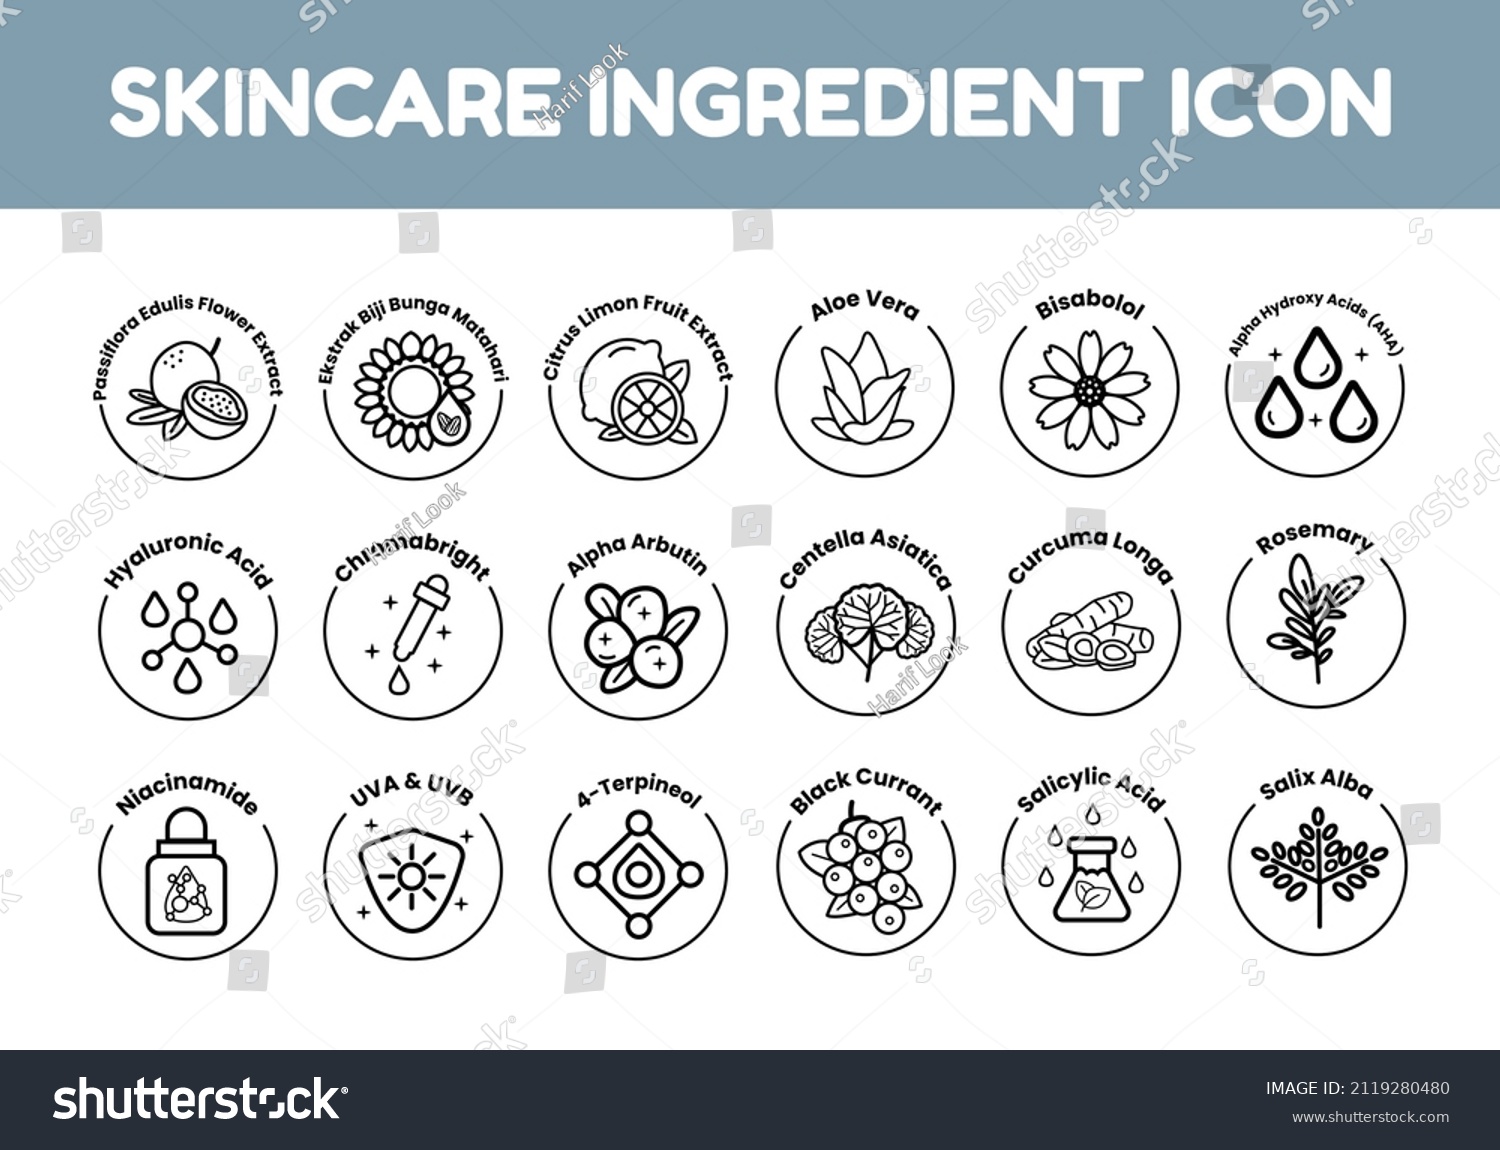 Vector set of design elements, icons, and badges for natural and organic cosmetics skincare ingredients in trendy linear style. Centella Asiatica, Curcuma Longa, Hyaluronic Acid, Chromabright, etc. #2119280480